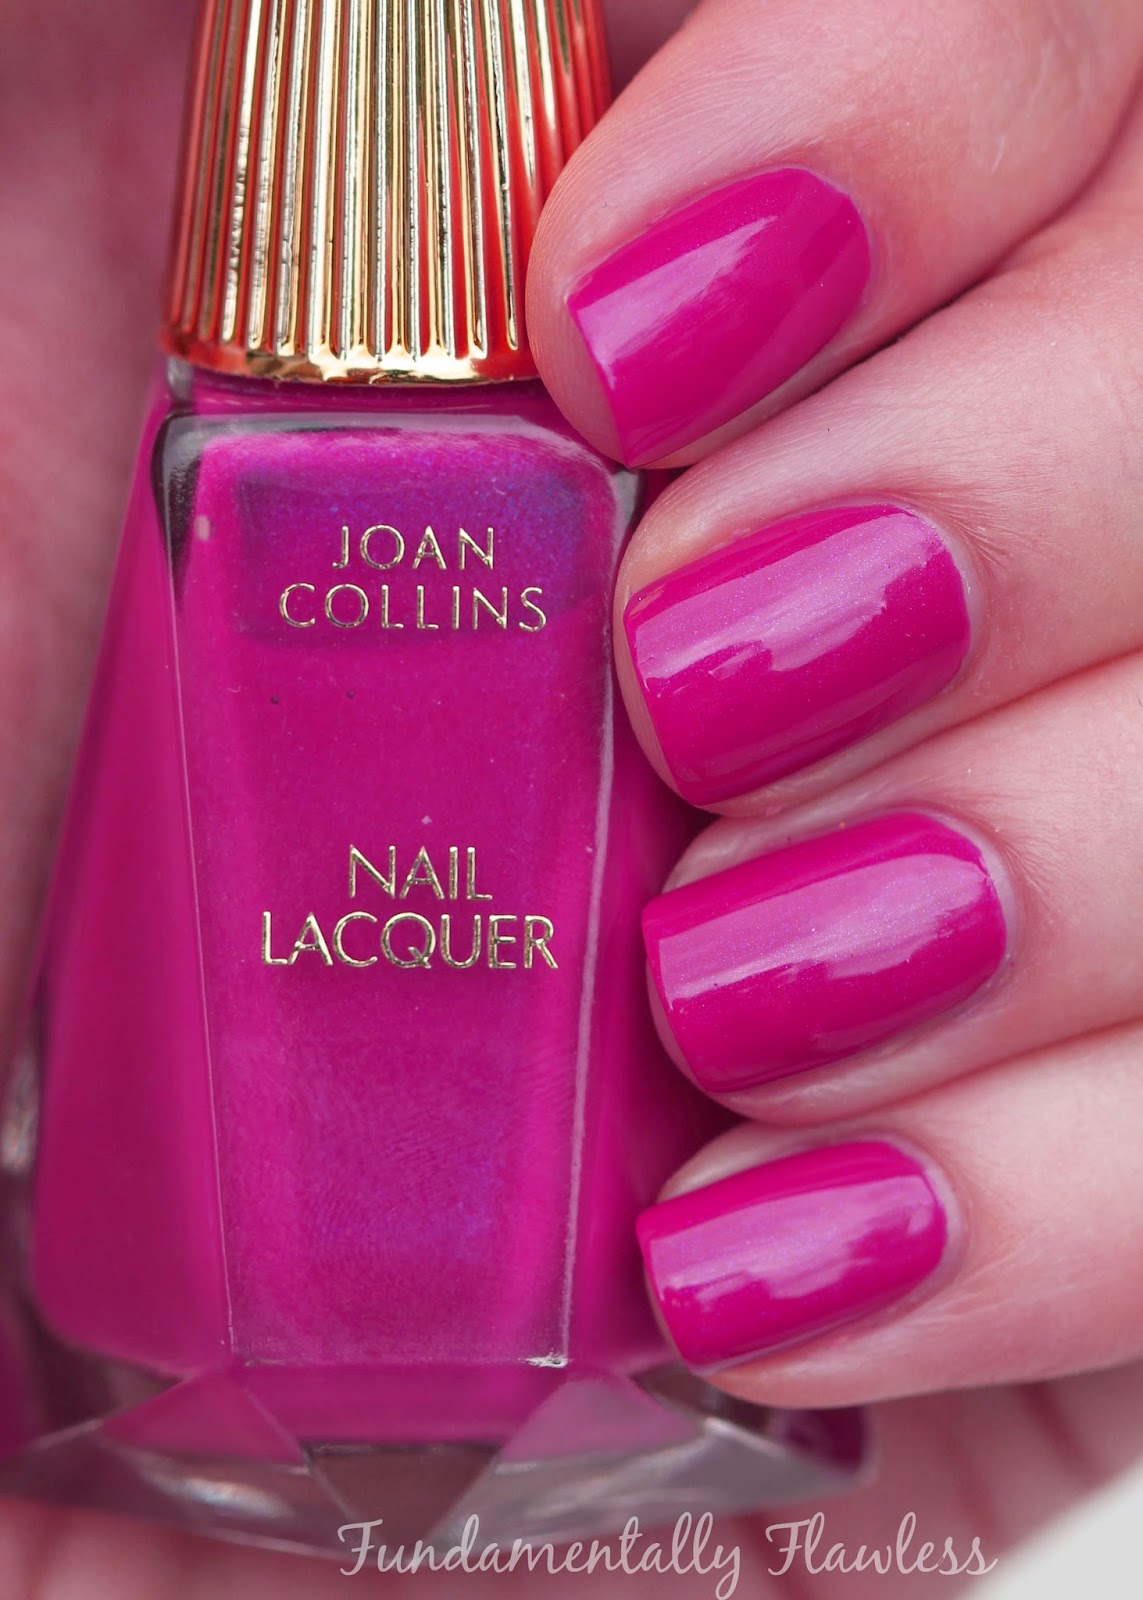 Joan Collins Nail Lacquer Lady Joan